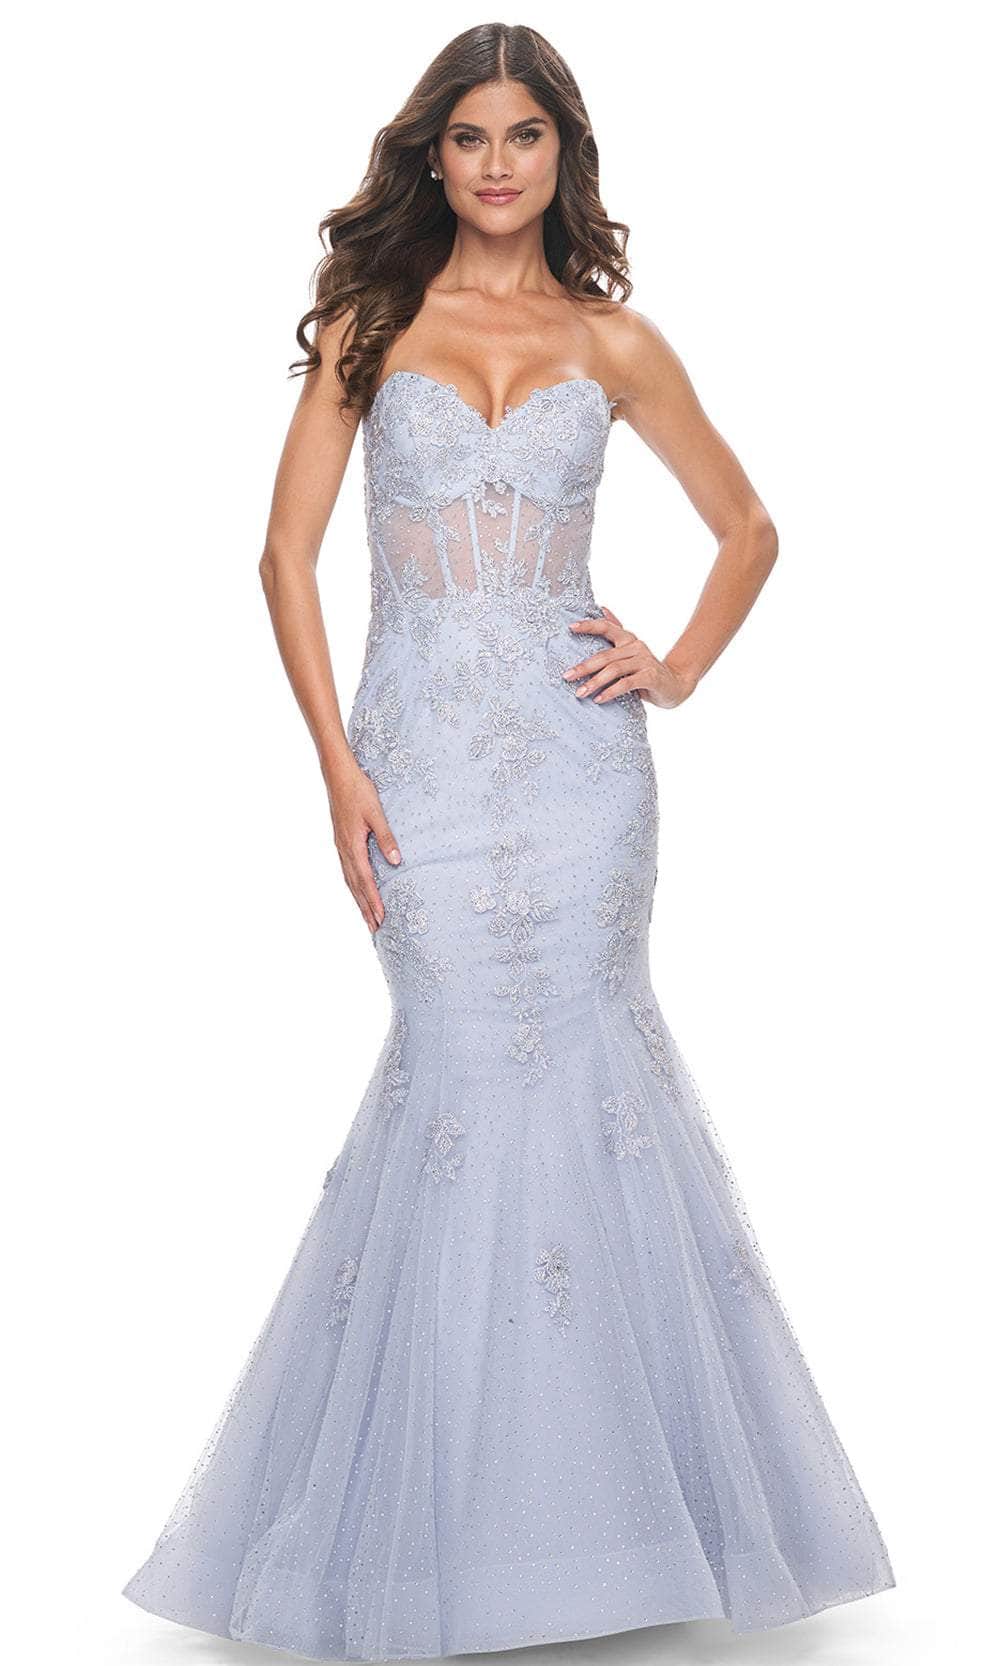 La Femme 32214 - Strapless Tulle Mermaid Prom Gown Prom Dresses 00 / Light Periwinkle